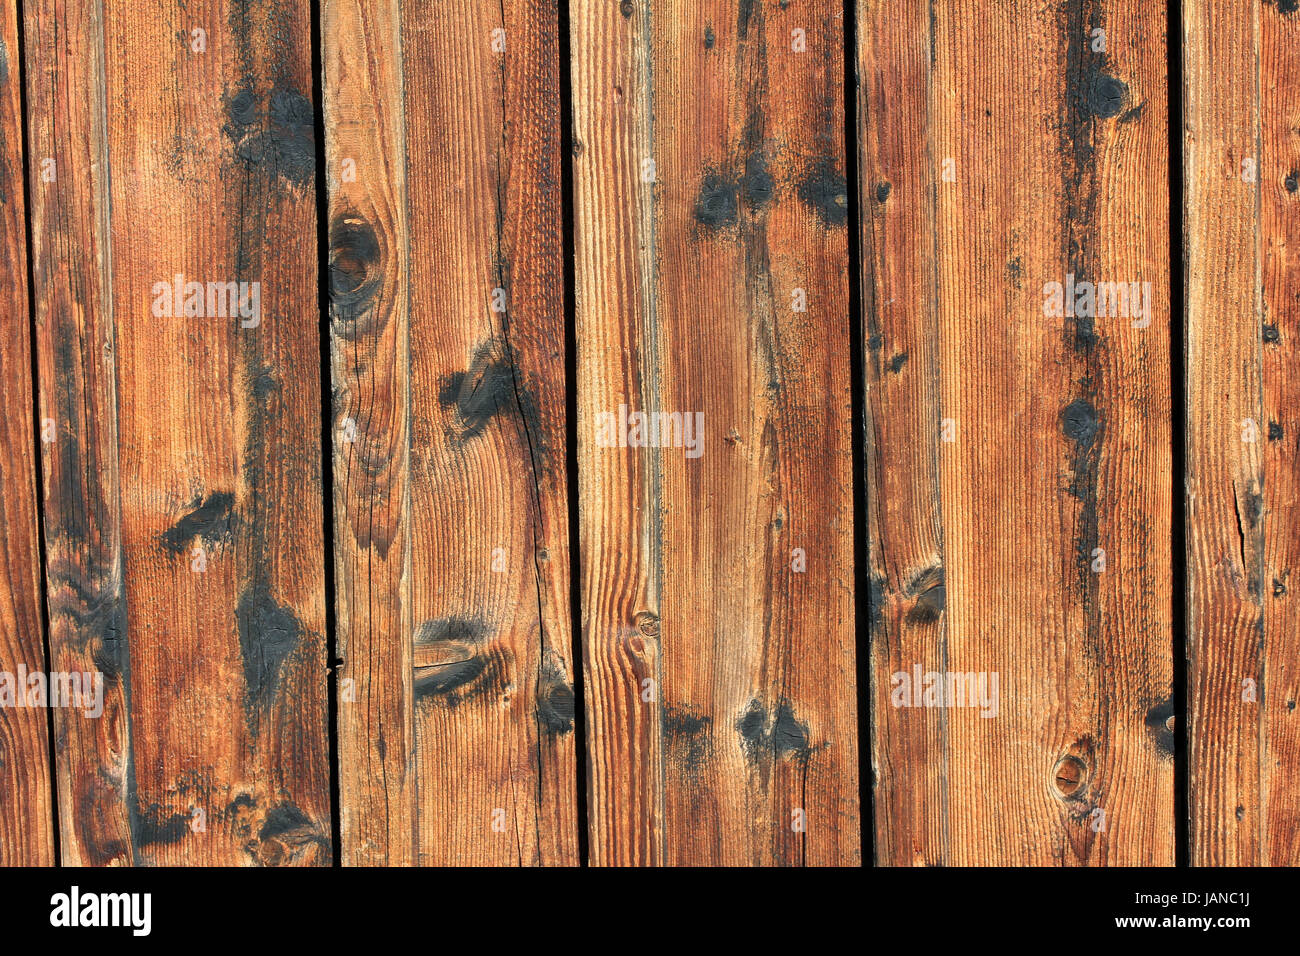 background - wooden wall Stock Photo